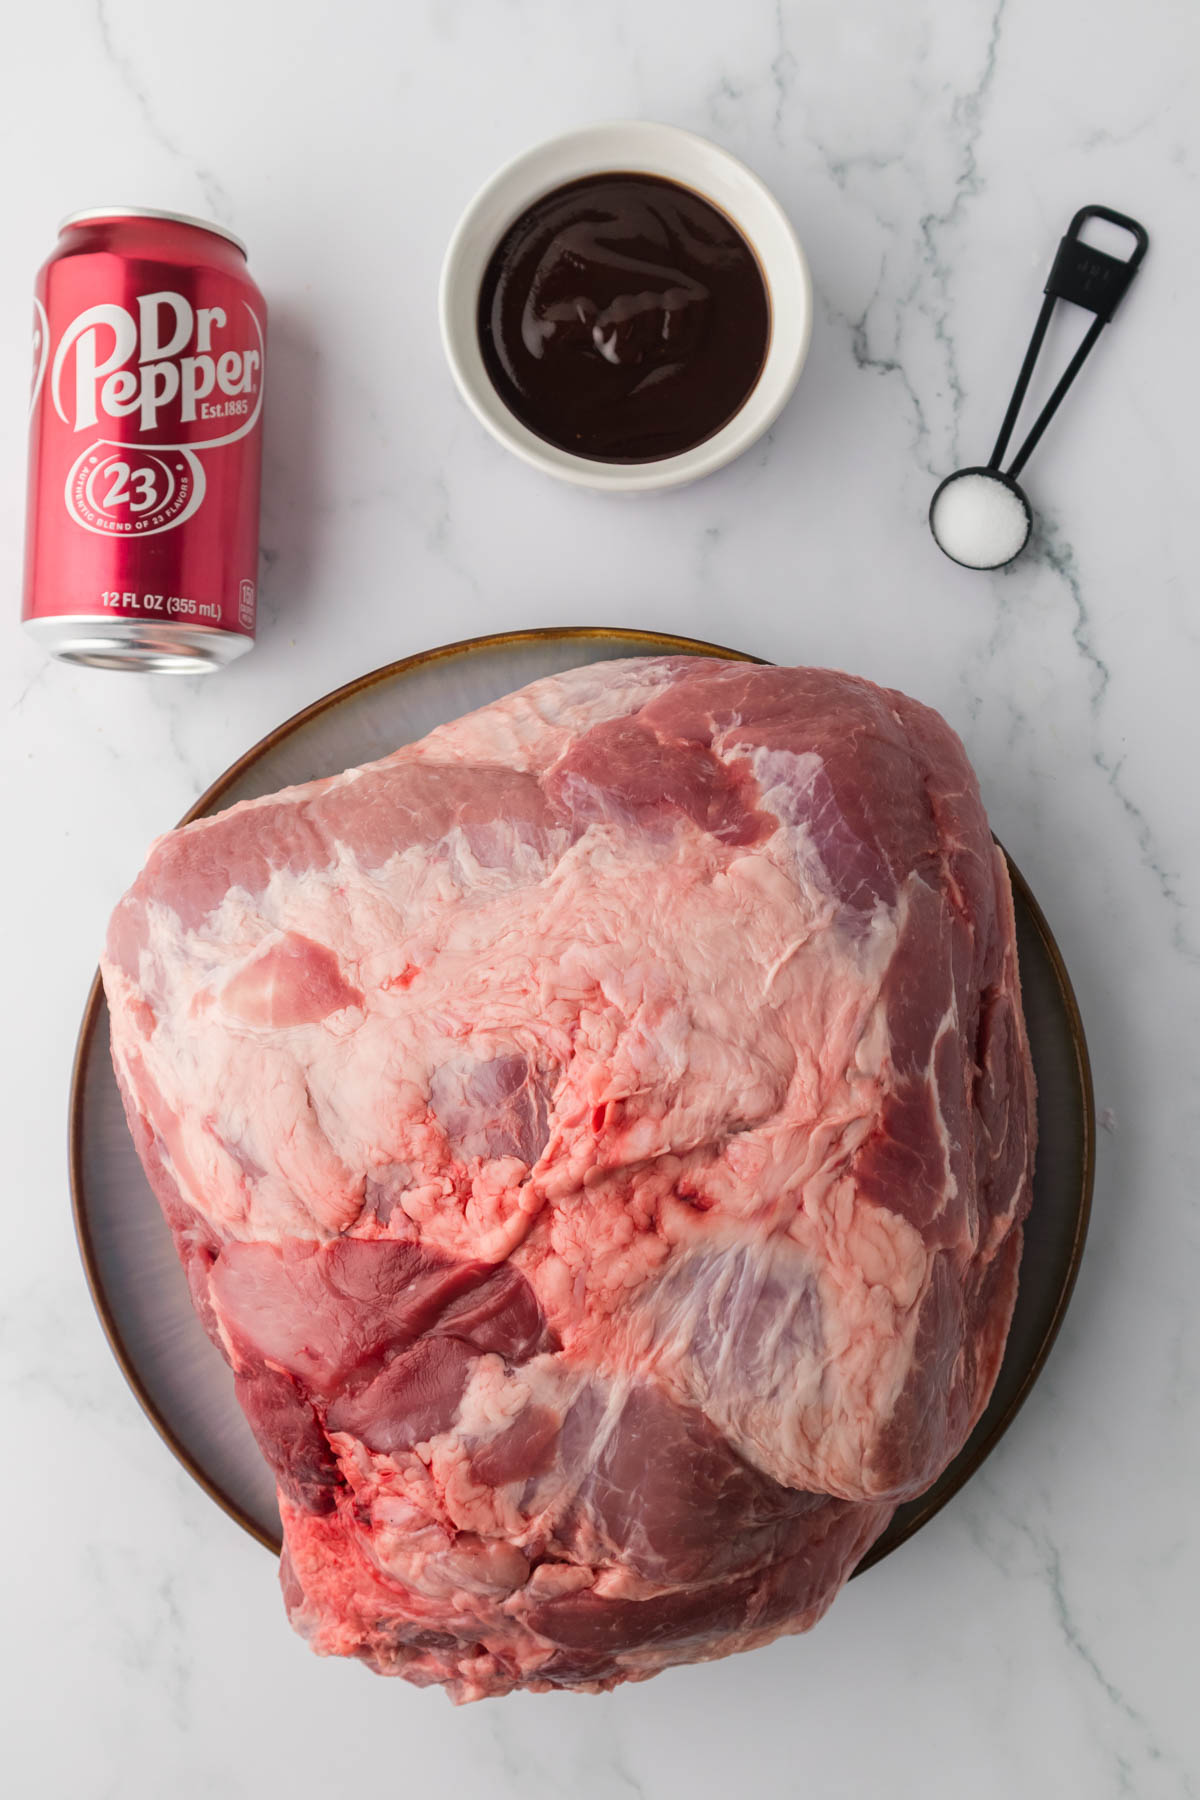 Overhead image of pork shoulder, a can of Dr Pepper, a teaspoon filled with salt, and a white bowl filled with bbq sauce. 